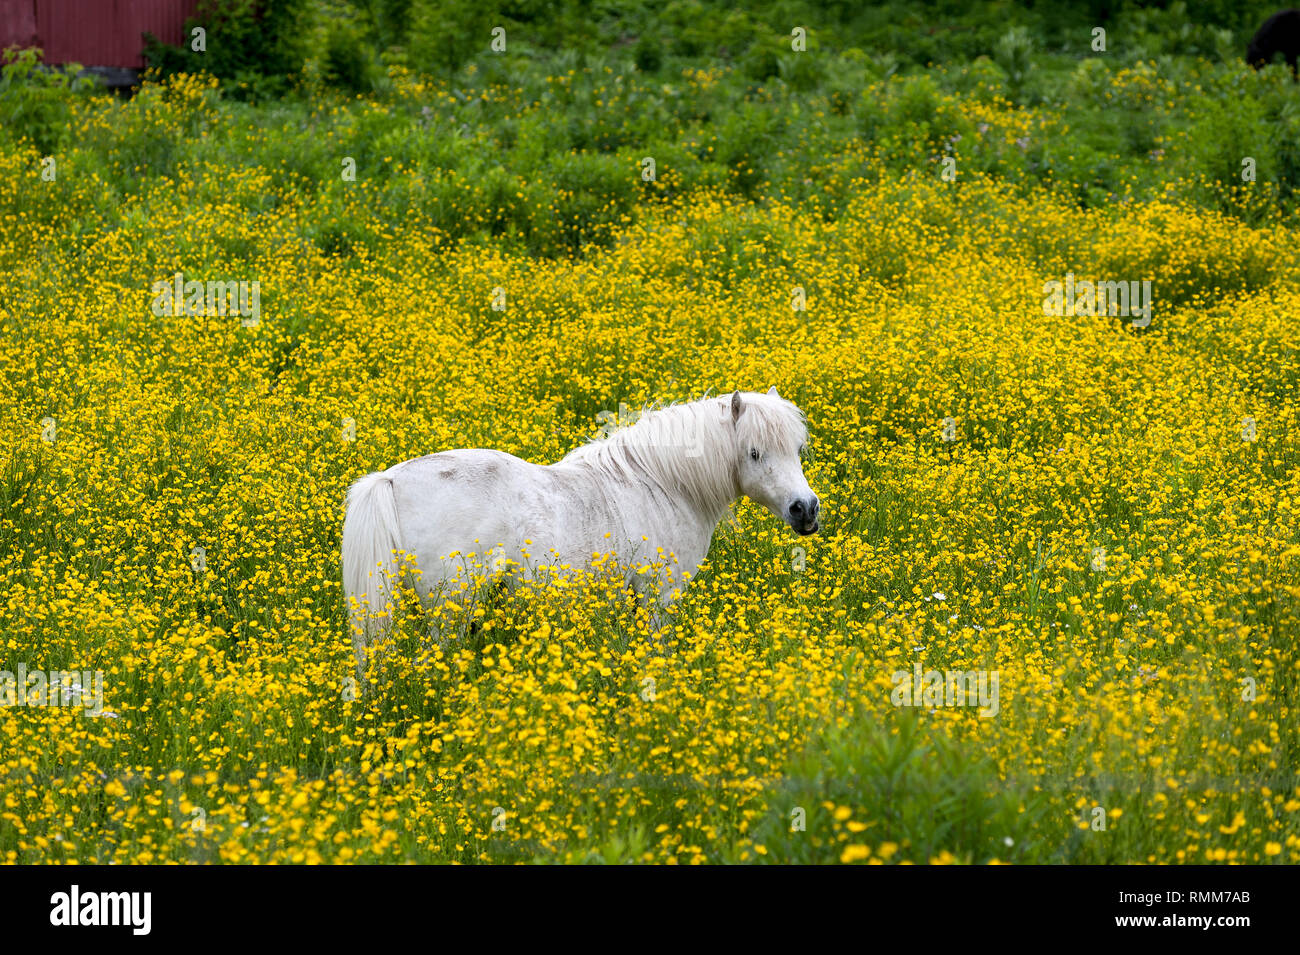 White horse in field of buttercup flowers Stock Photo